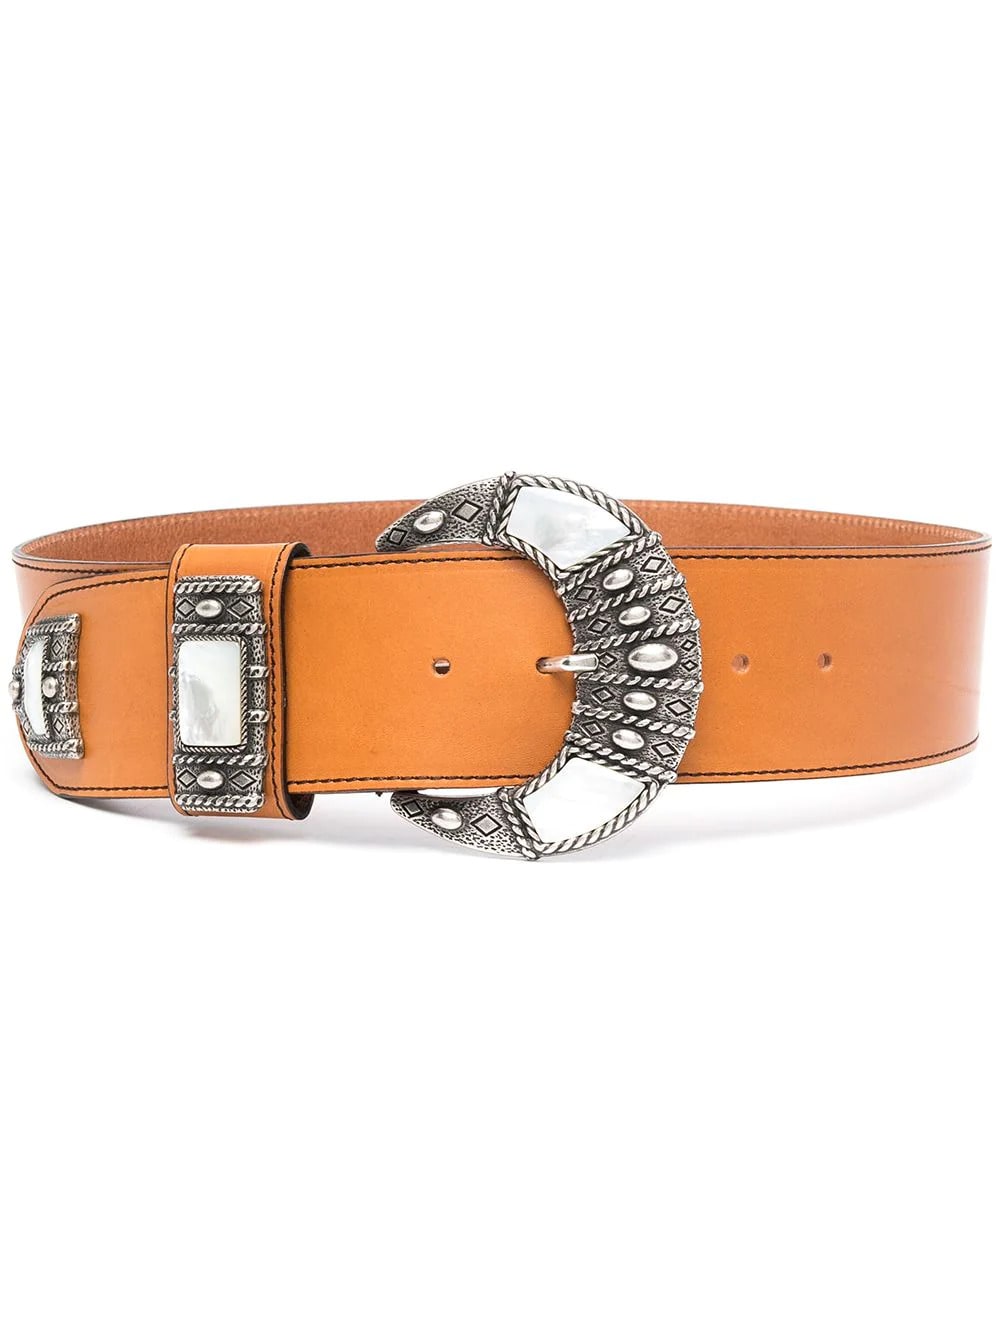 Etro Woman Belt In Orange Leather With Carved Buckle And Mother Of Pearl Applications